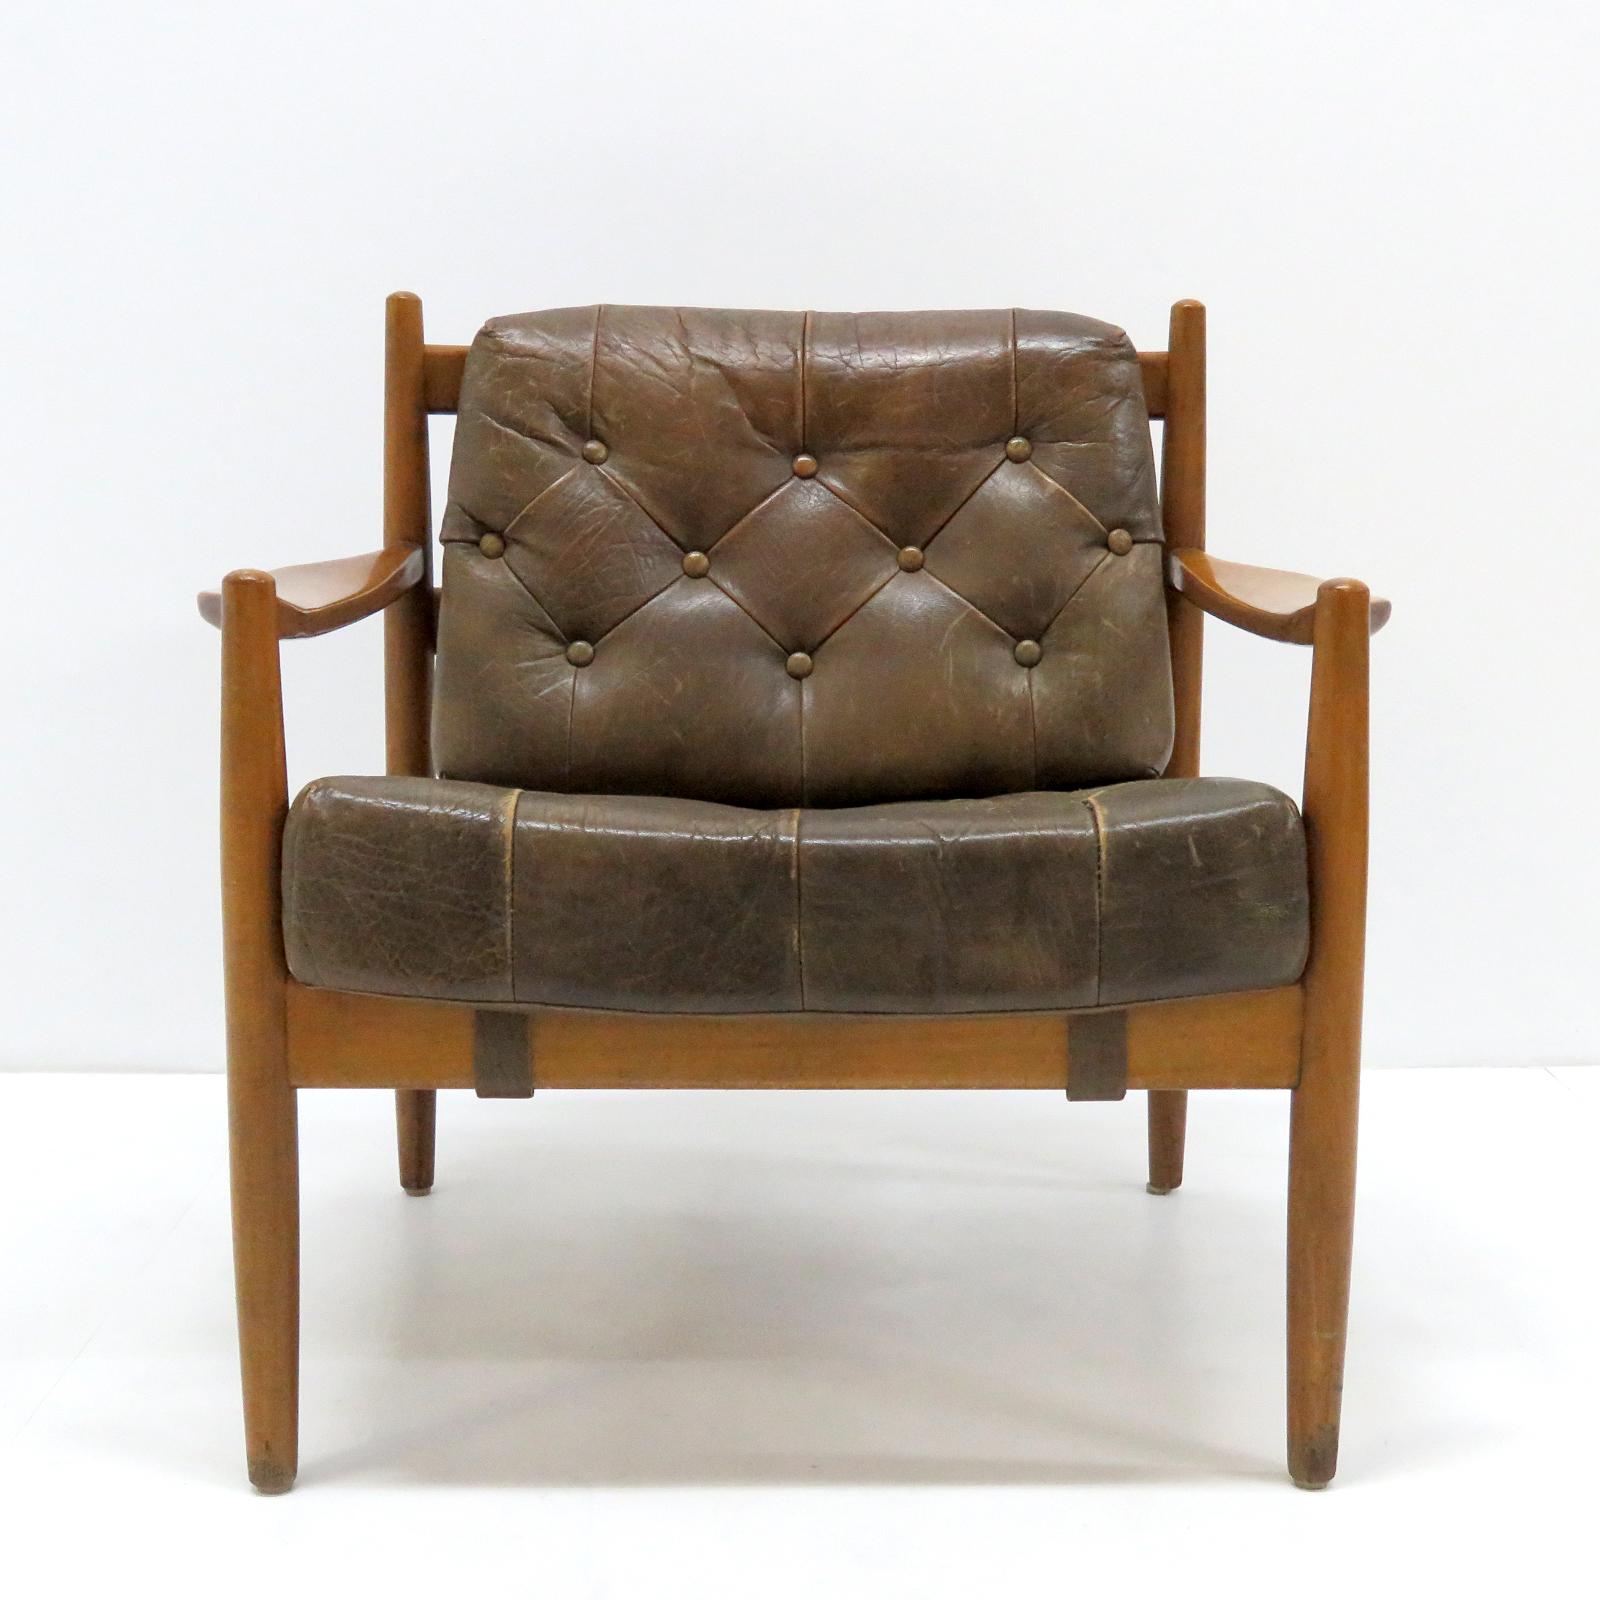 Wonderful lounge chair 'Läckö' by Ingemar Thillmark for OPE Mobler, 1960s in thick tufted leather on a stained beech wood frame.